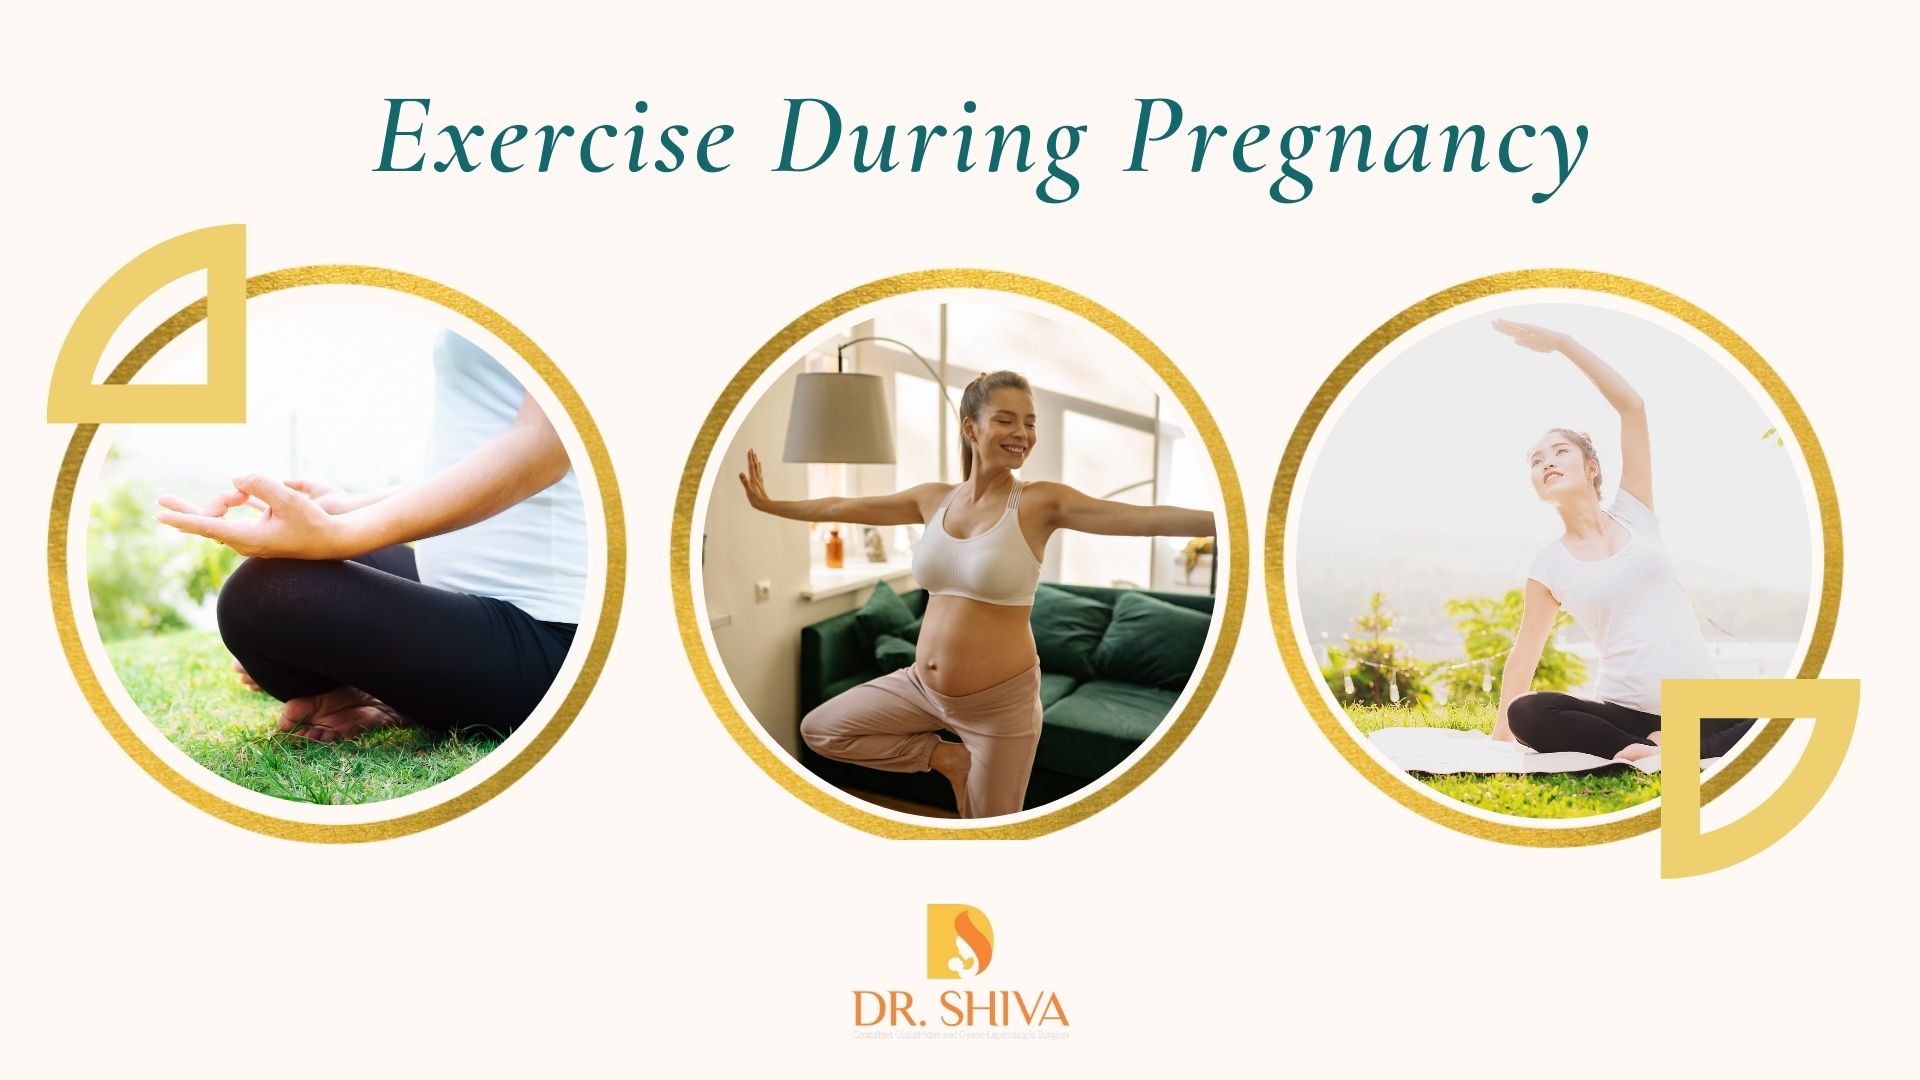 Exercise During Pregnancy: How to Do It Safely 